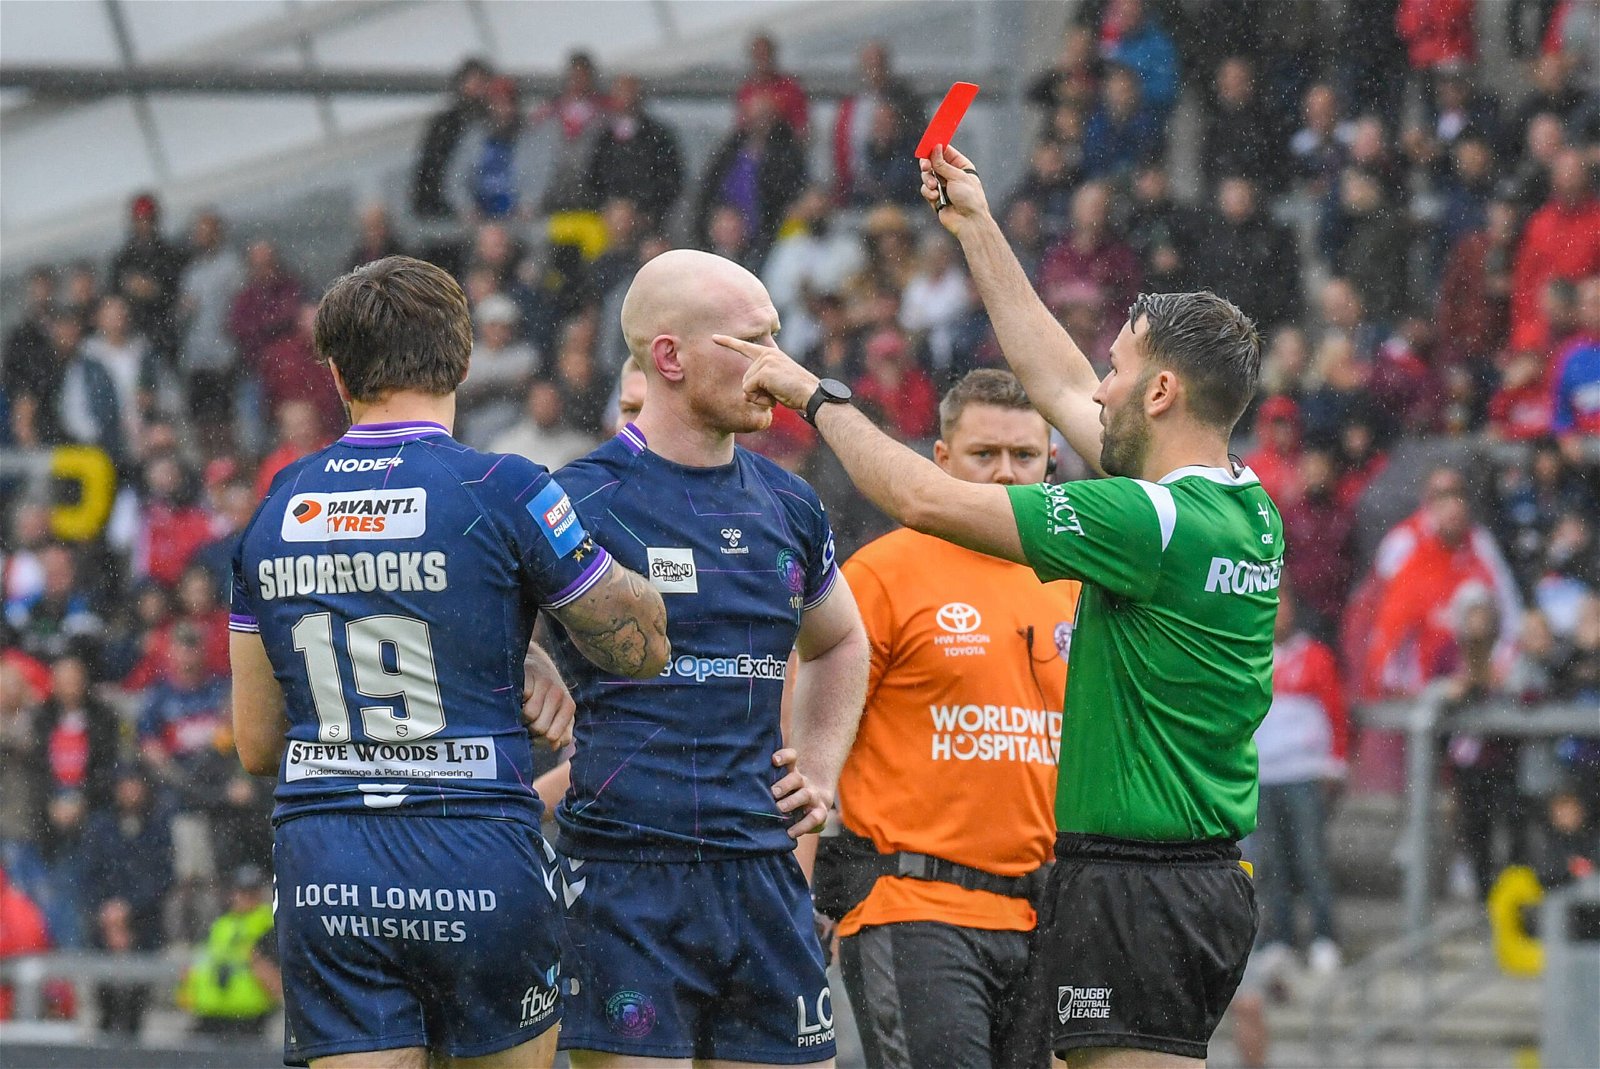 Liam Moore, in Super League referee gear, gives Wigan's exasperated Joel Shorrocks a red card.